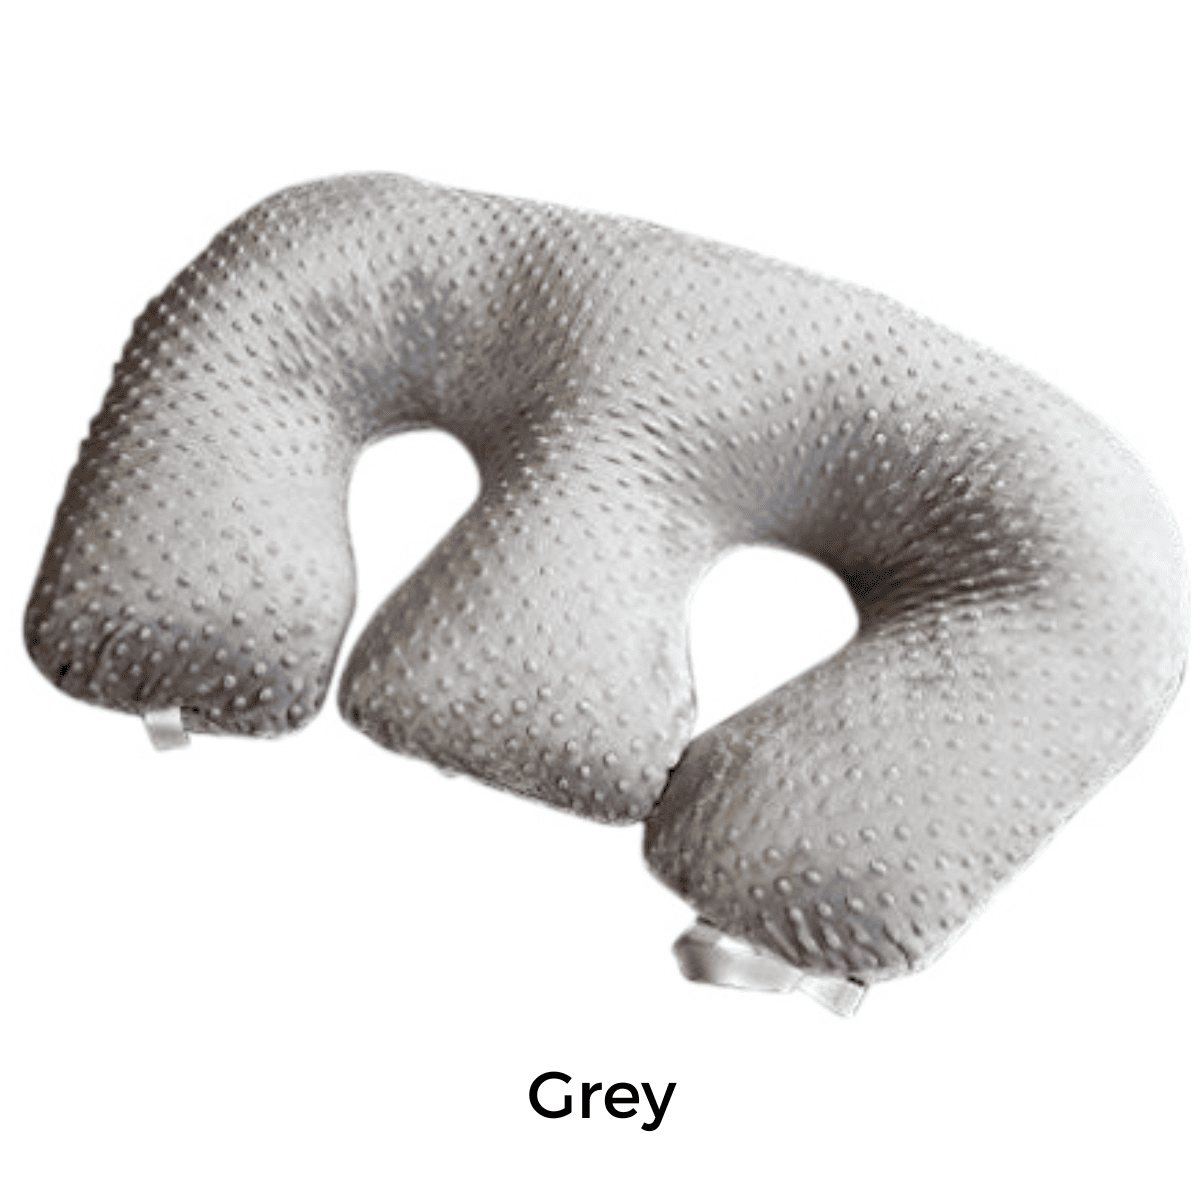 https://twinsandmore.co/wp-content/uploads/2021/07/Twin-Z-Pillow-Grey-1200-x-1200.png